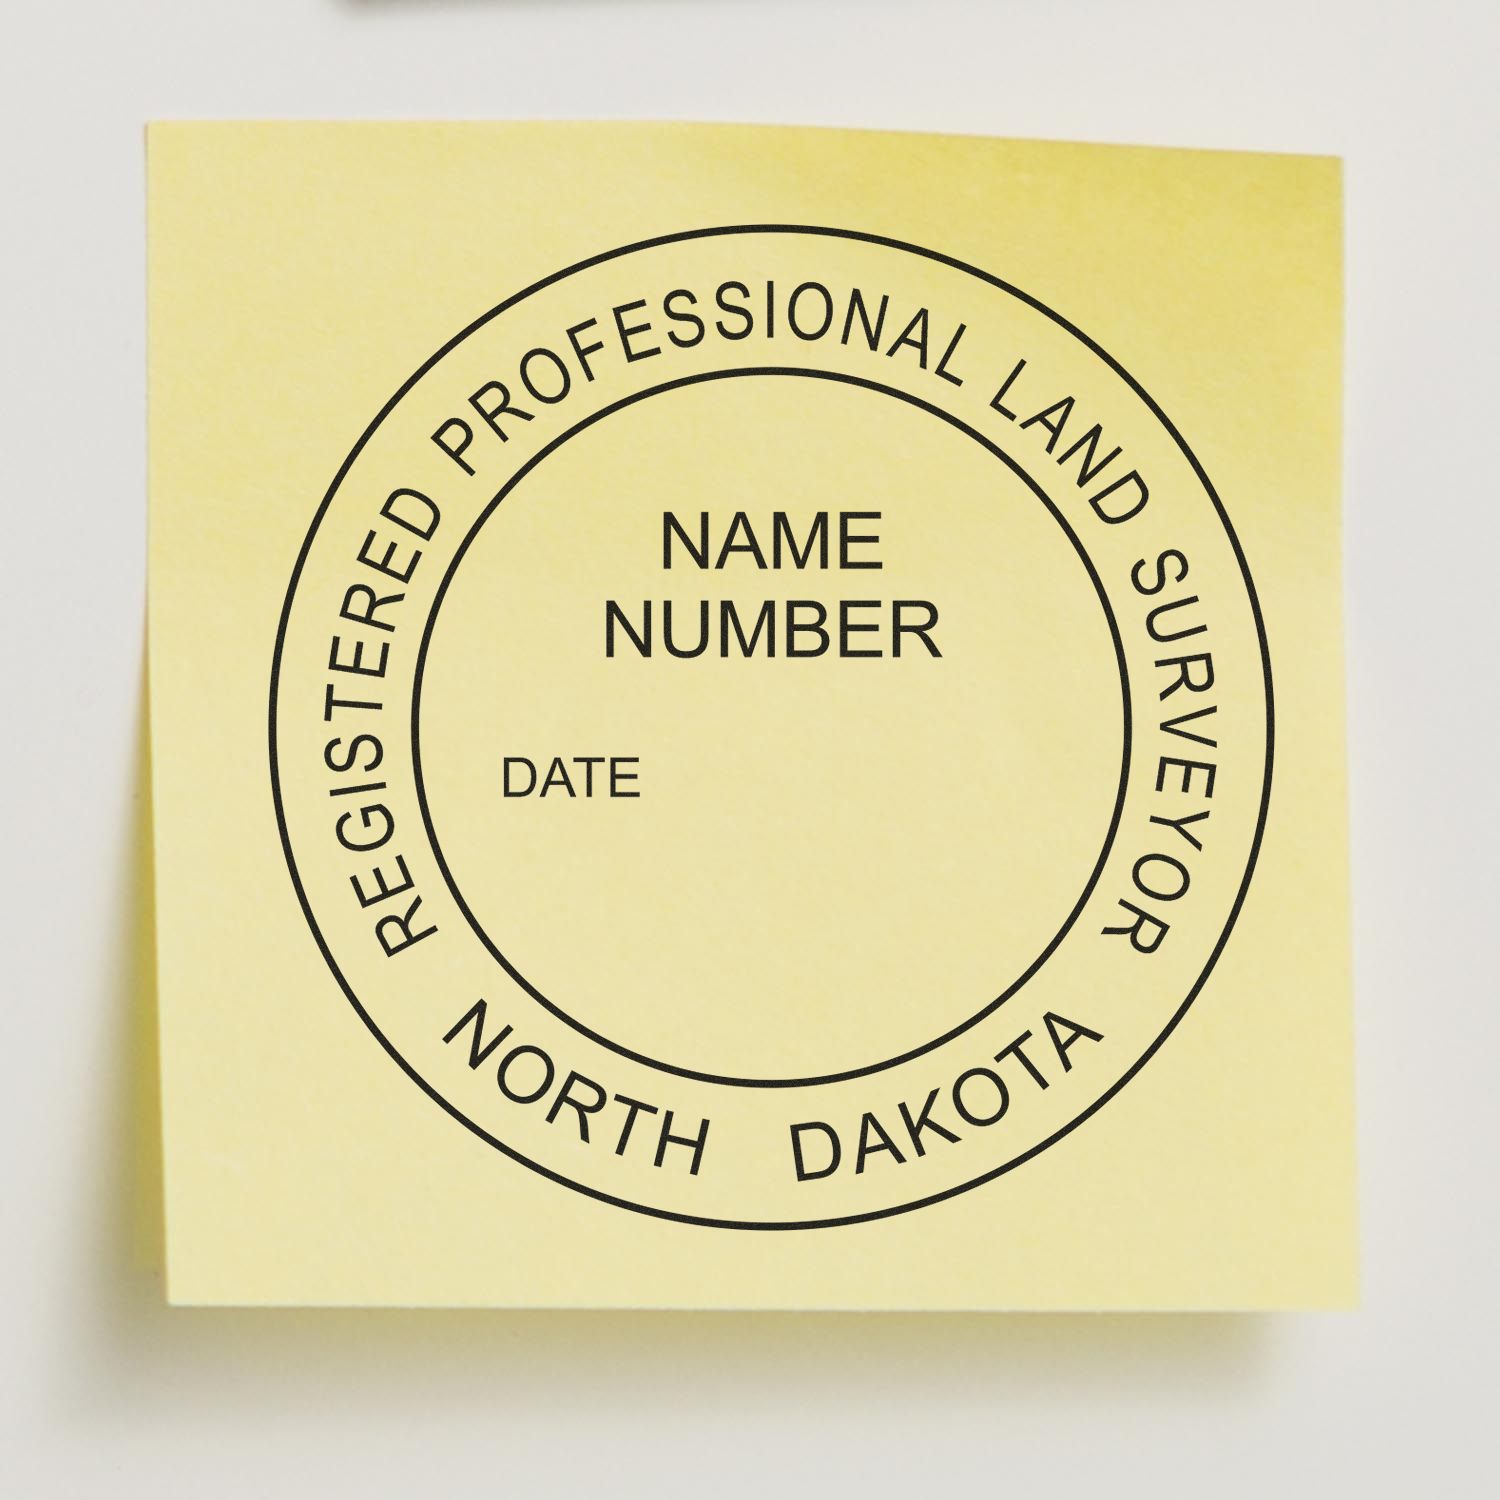 Elevate Your Career: The Impact of the North Dakota Land Surveyor Stamp Feature Image